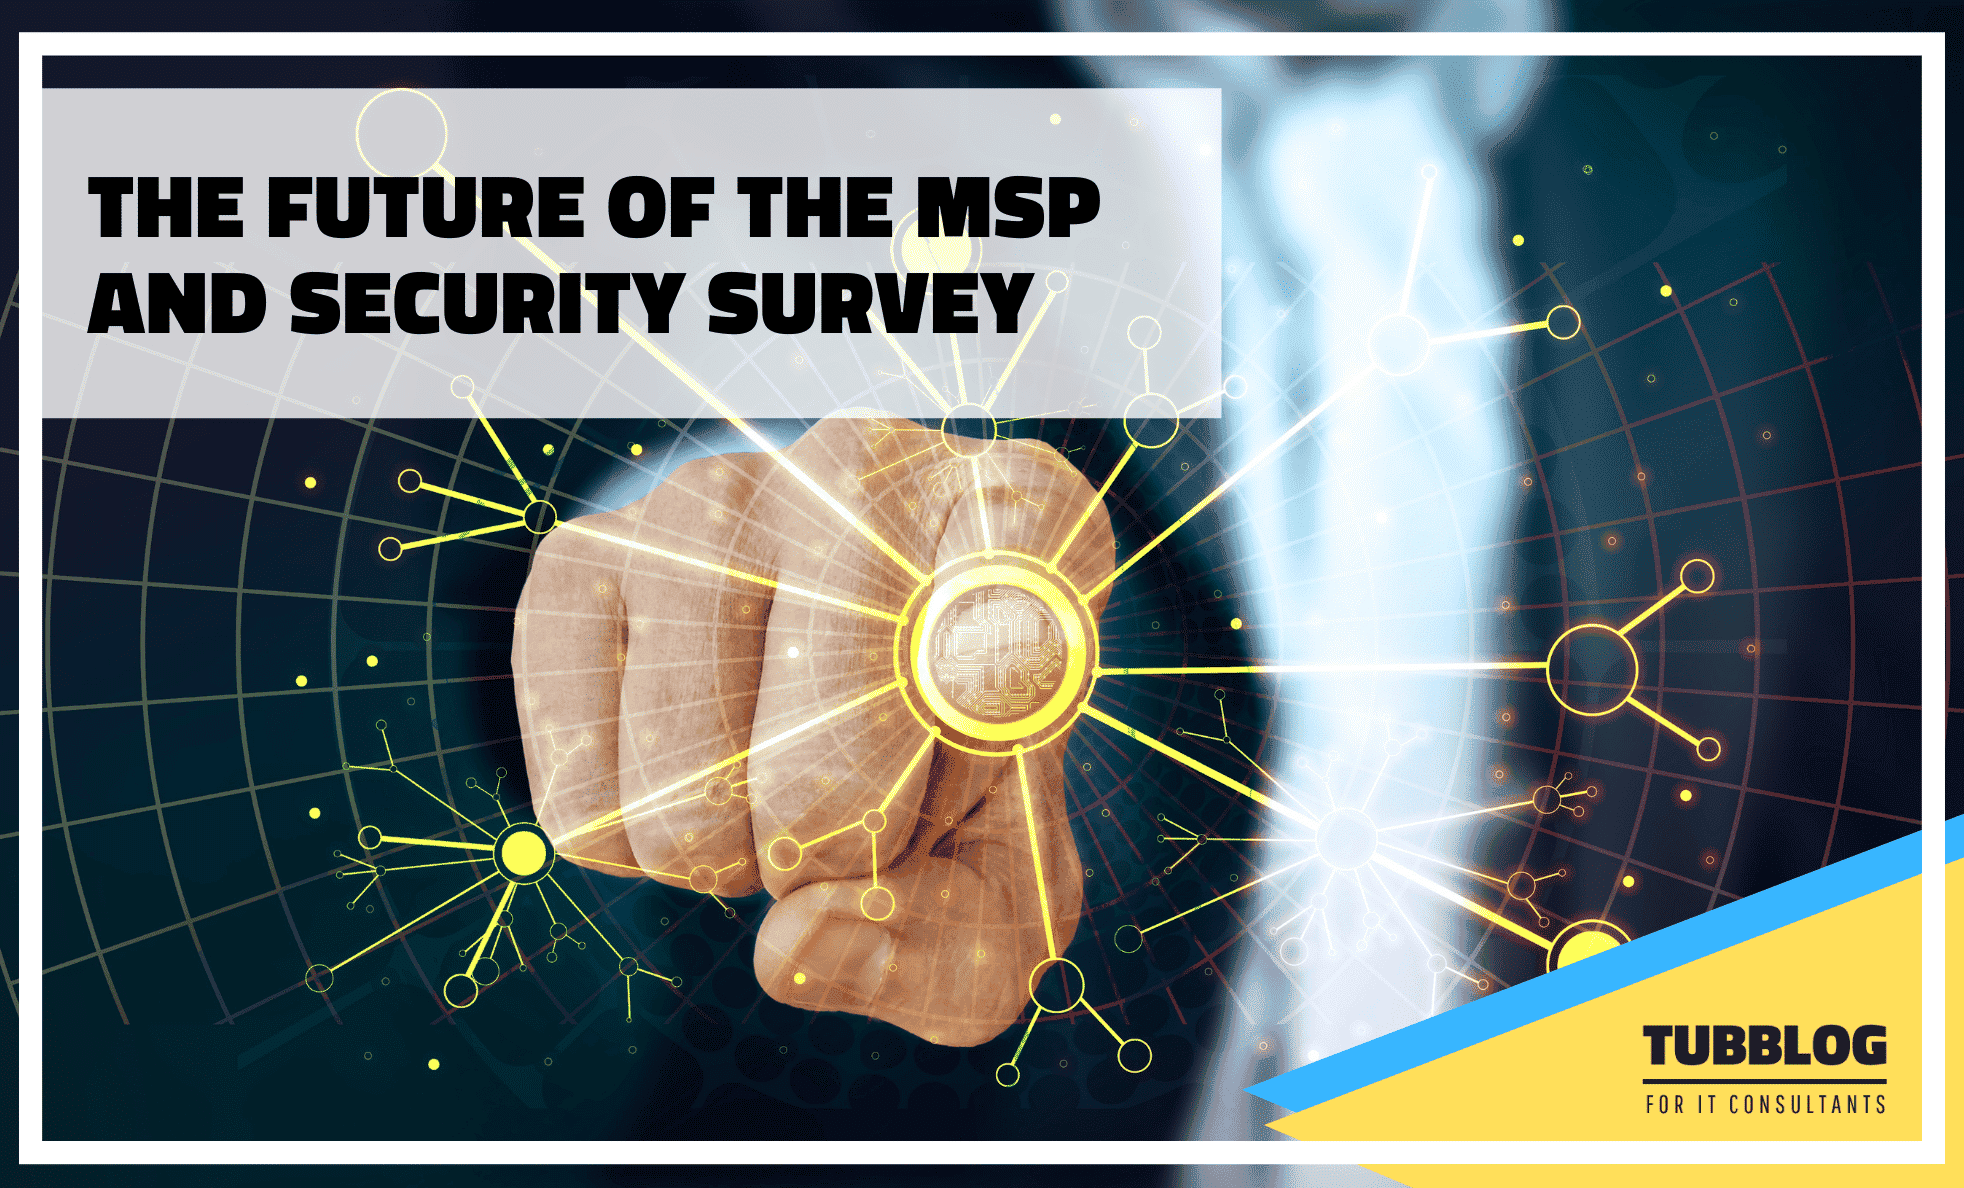 The Future of the MSP and Security Survey